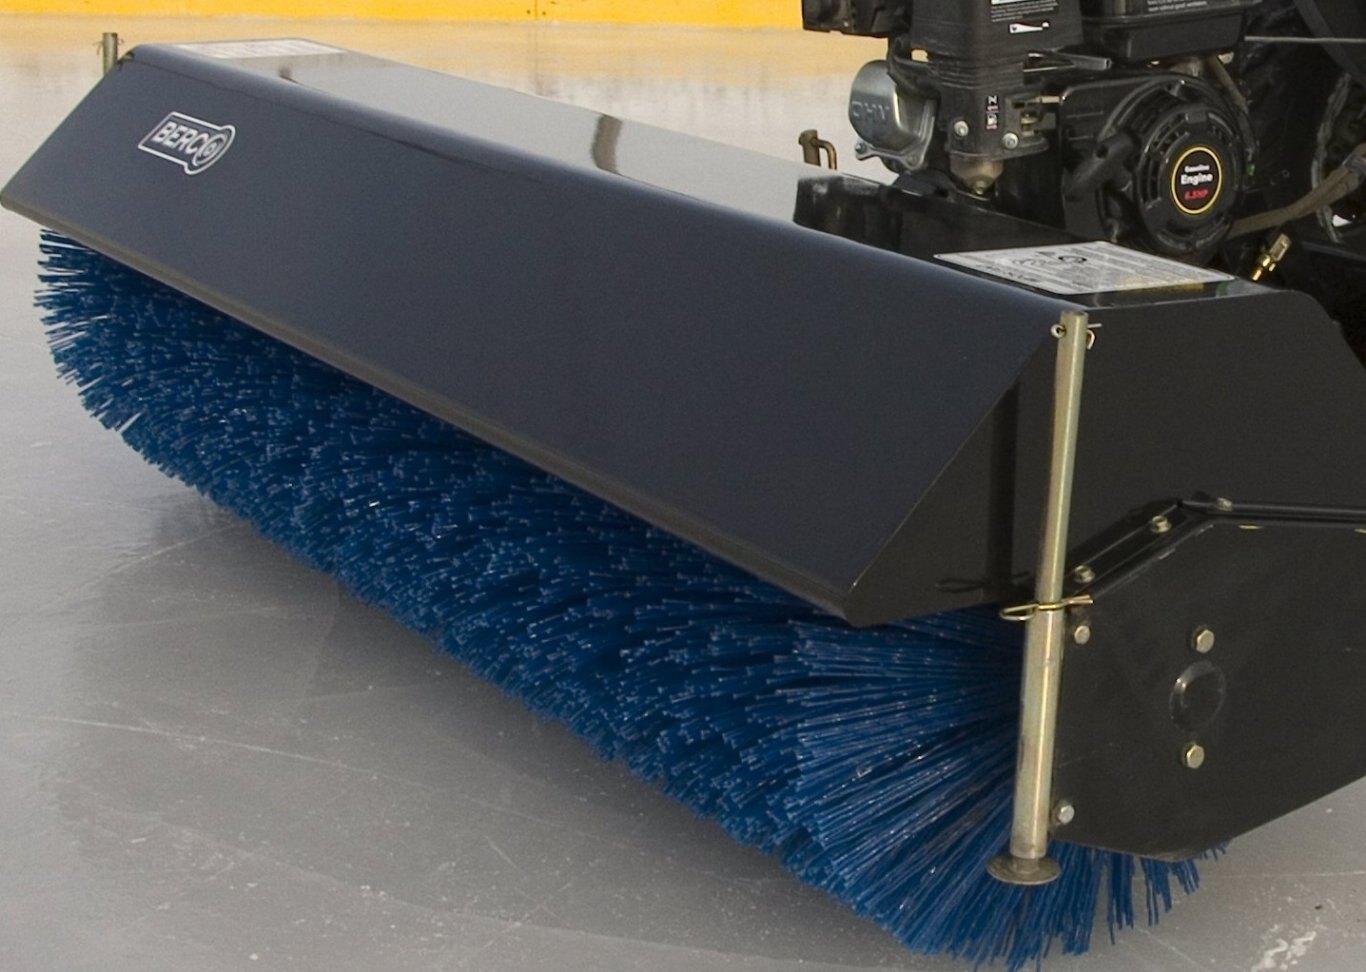 Bercomac 60 Rotary Broom for tractors equipped with ''Skid Steer'' style attach